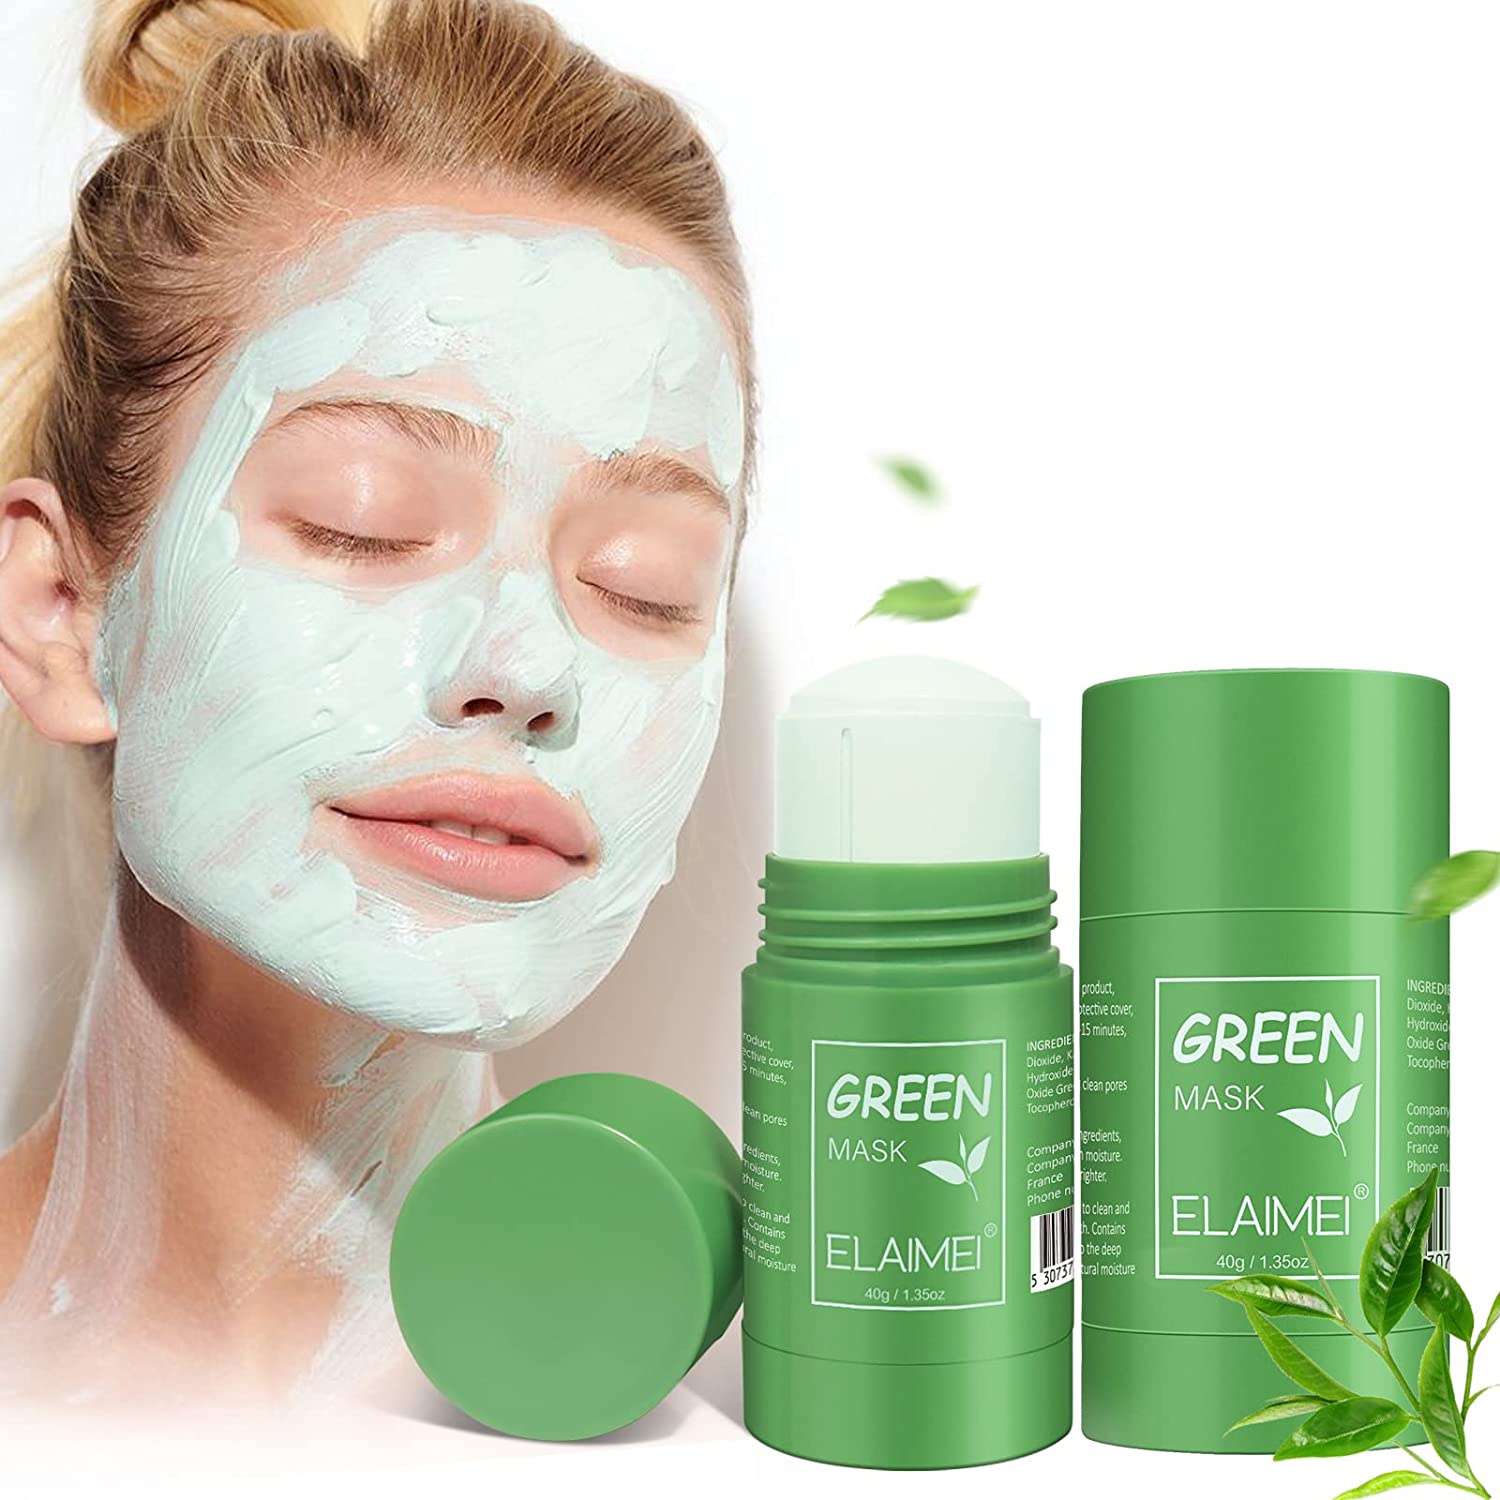 NUEDSFXO 2 x green mask stick, green tea mask, moisturises and controls the oil, deep cleansing pores, combats acne and blackheads, regulate the water and oil household of the skin